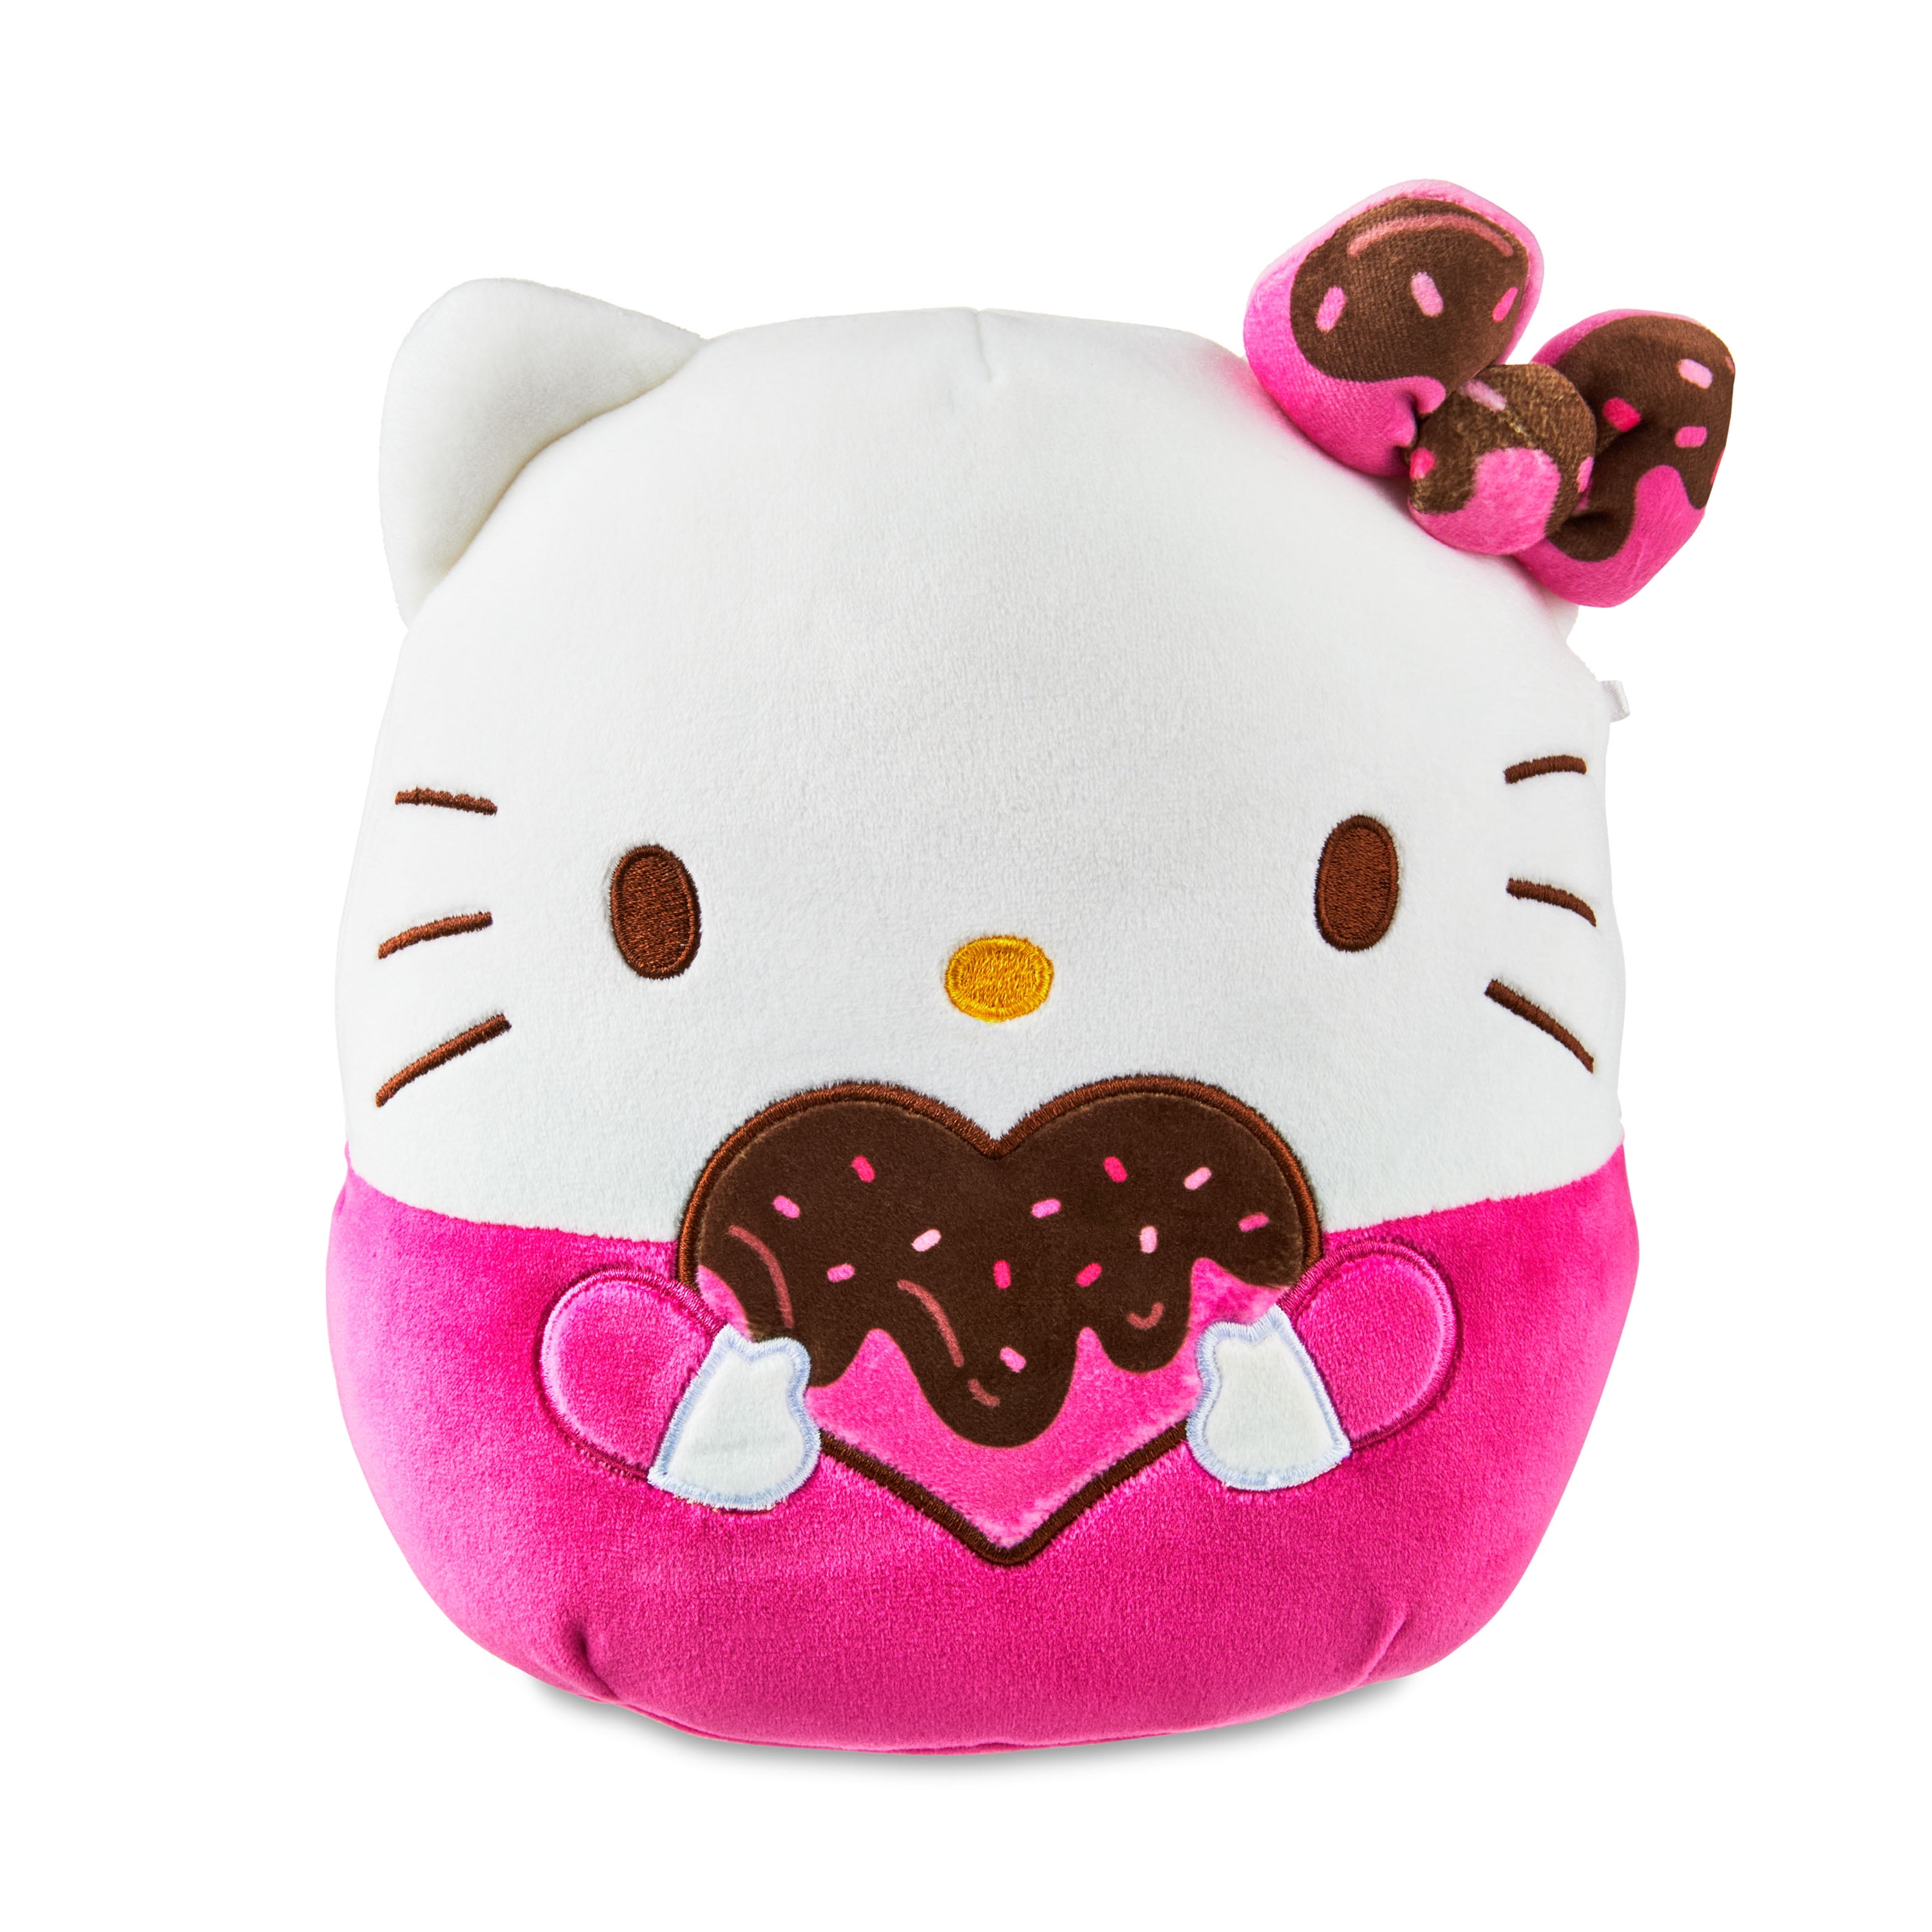 Squishmallows Official Plush 8 inch Pink Hello Kitty - Child's Ultra Soft  Stuffed Plush Toy